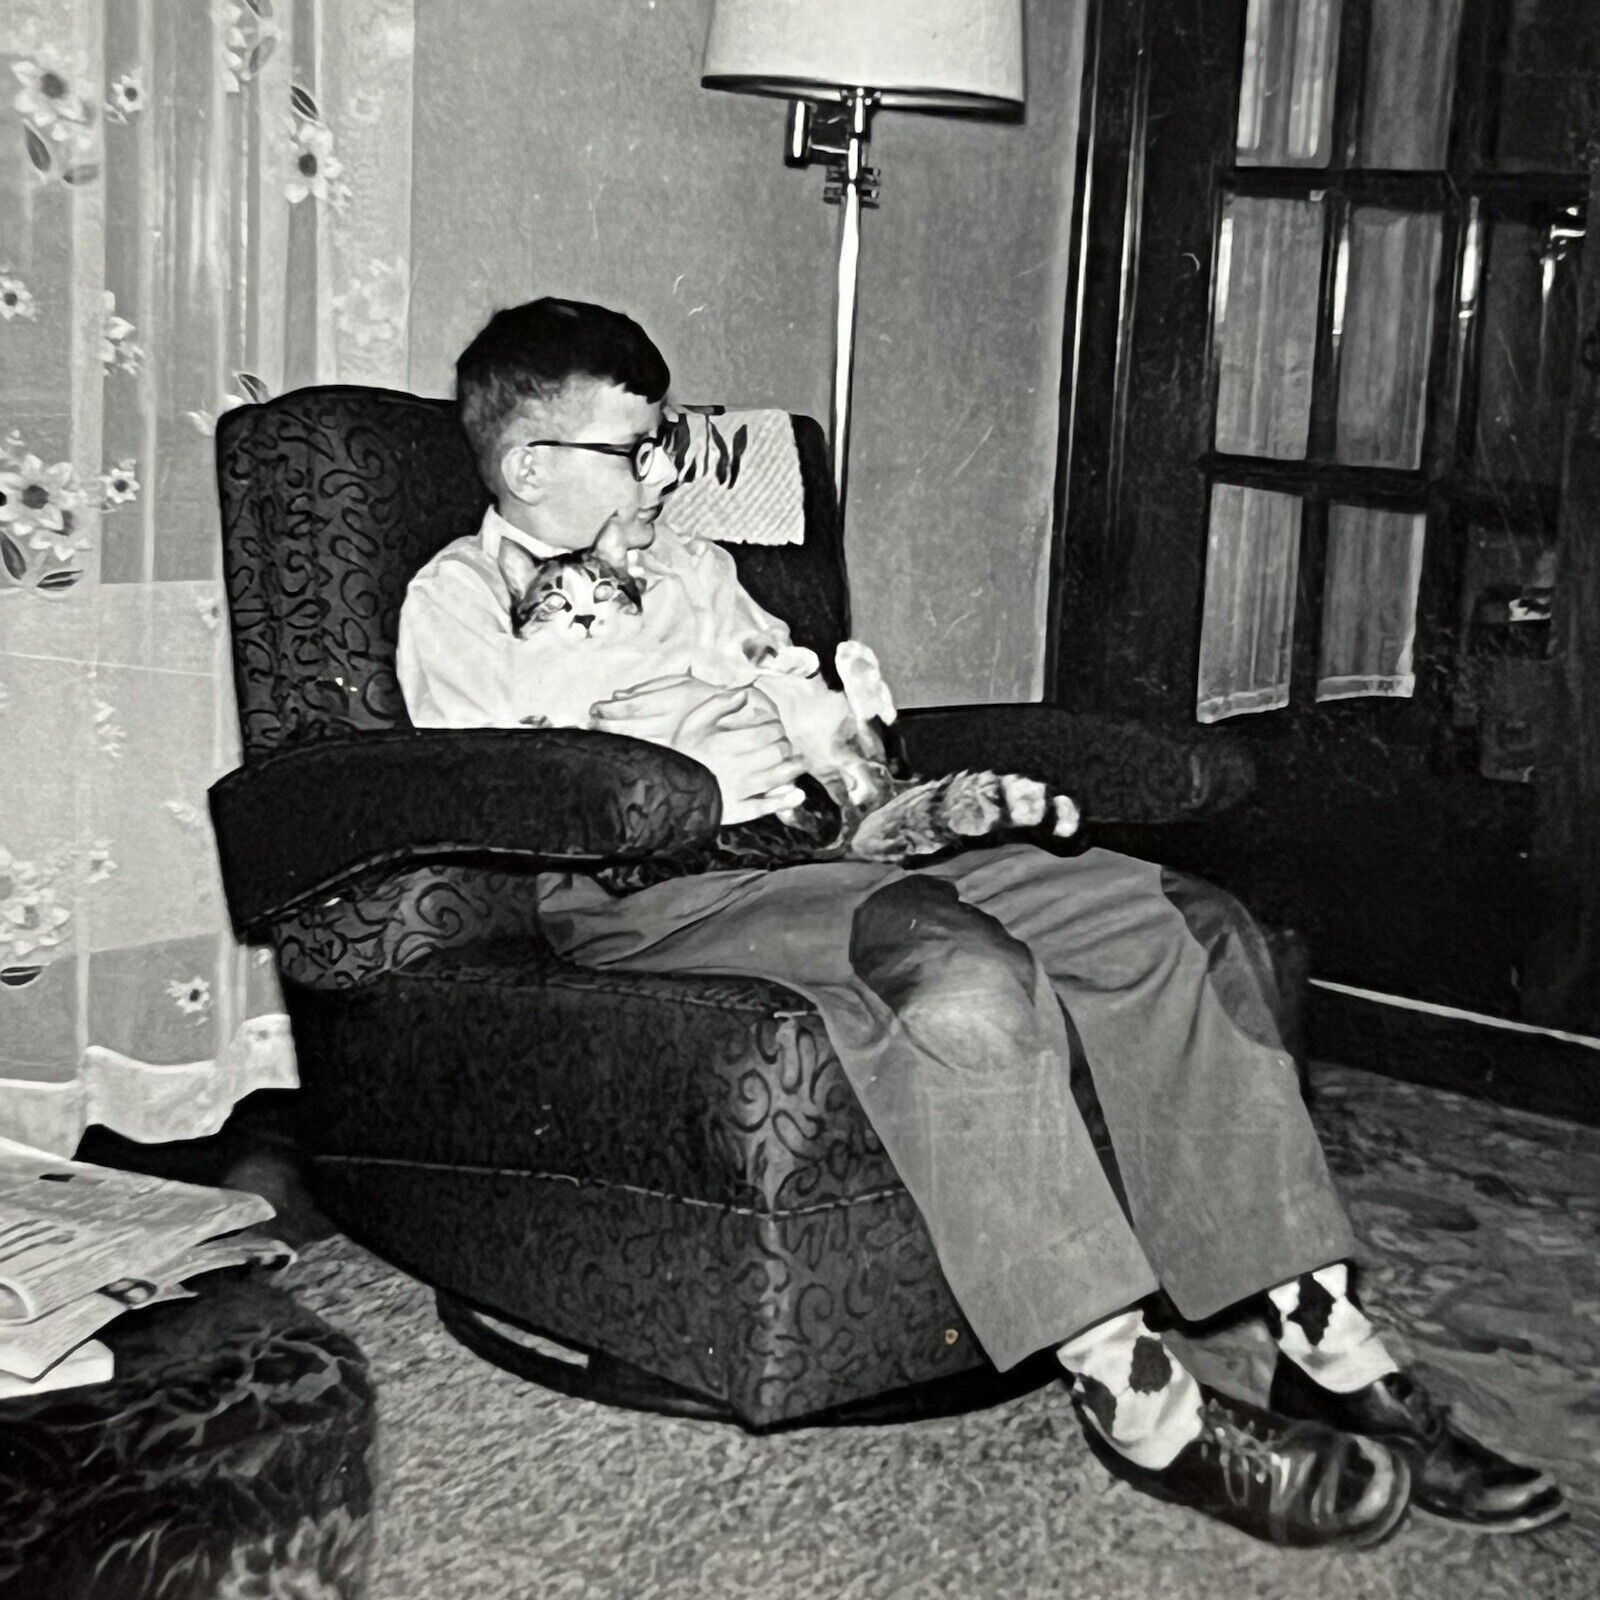 Vintage B&W Snapshot Photograph Boy In Recliner With Beloved Kitty Cat 1950s